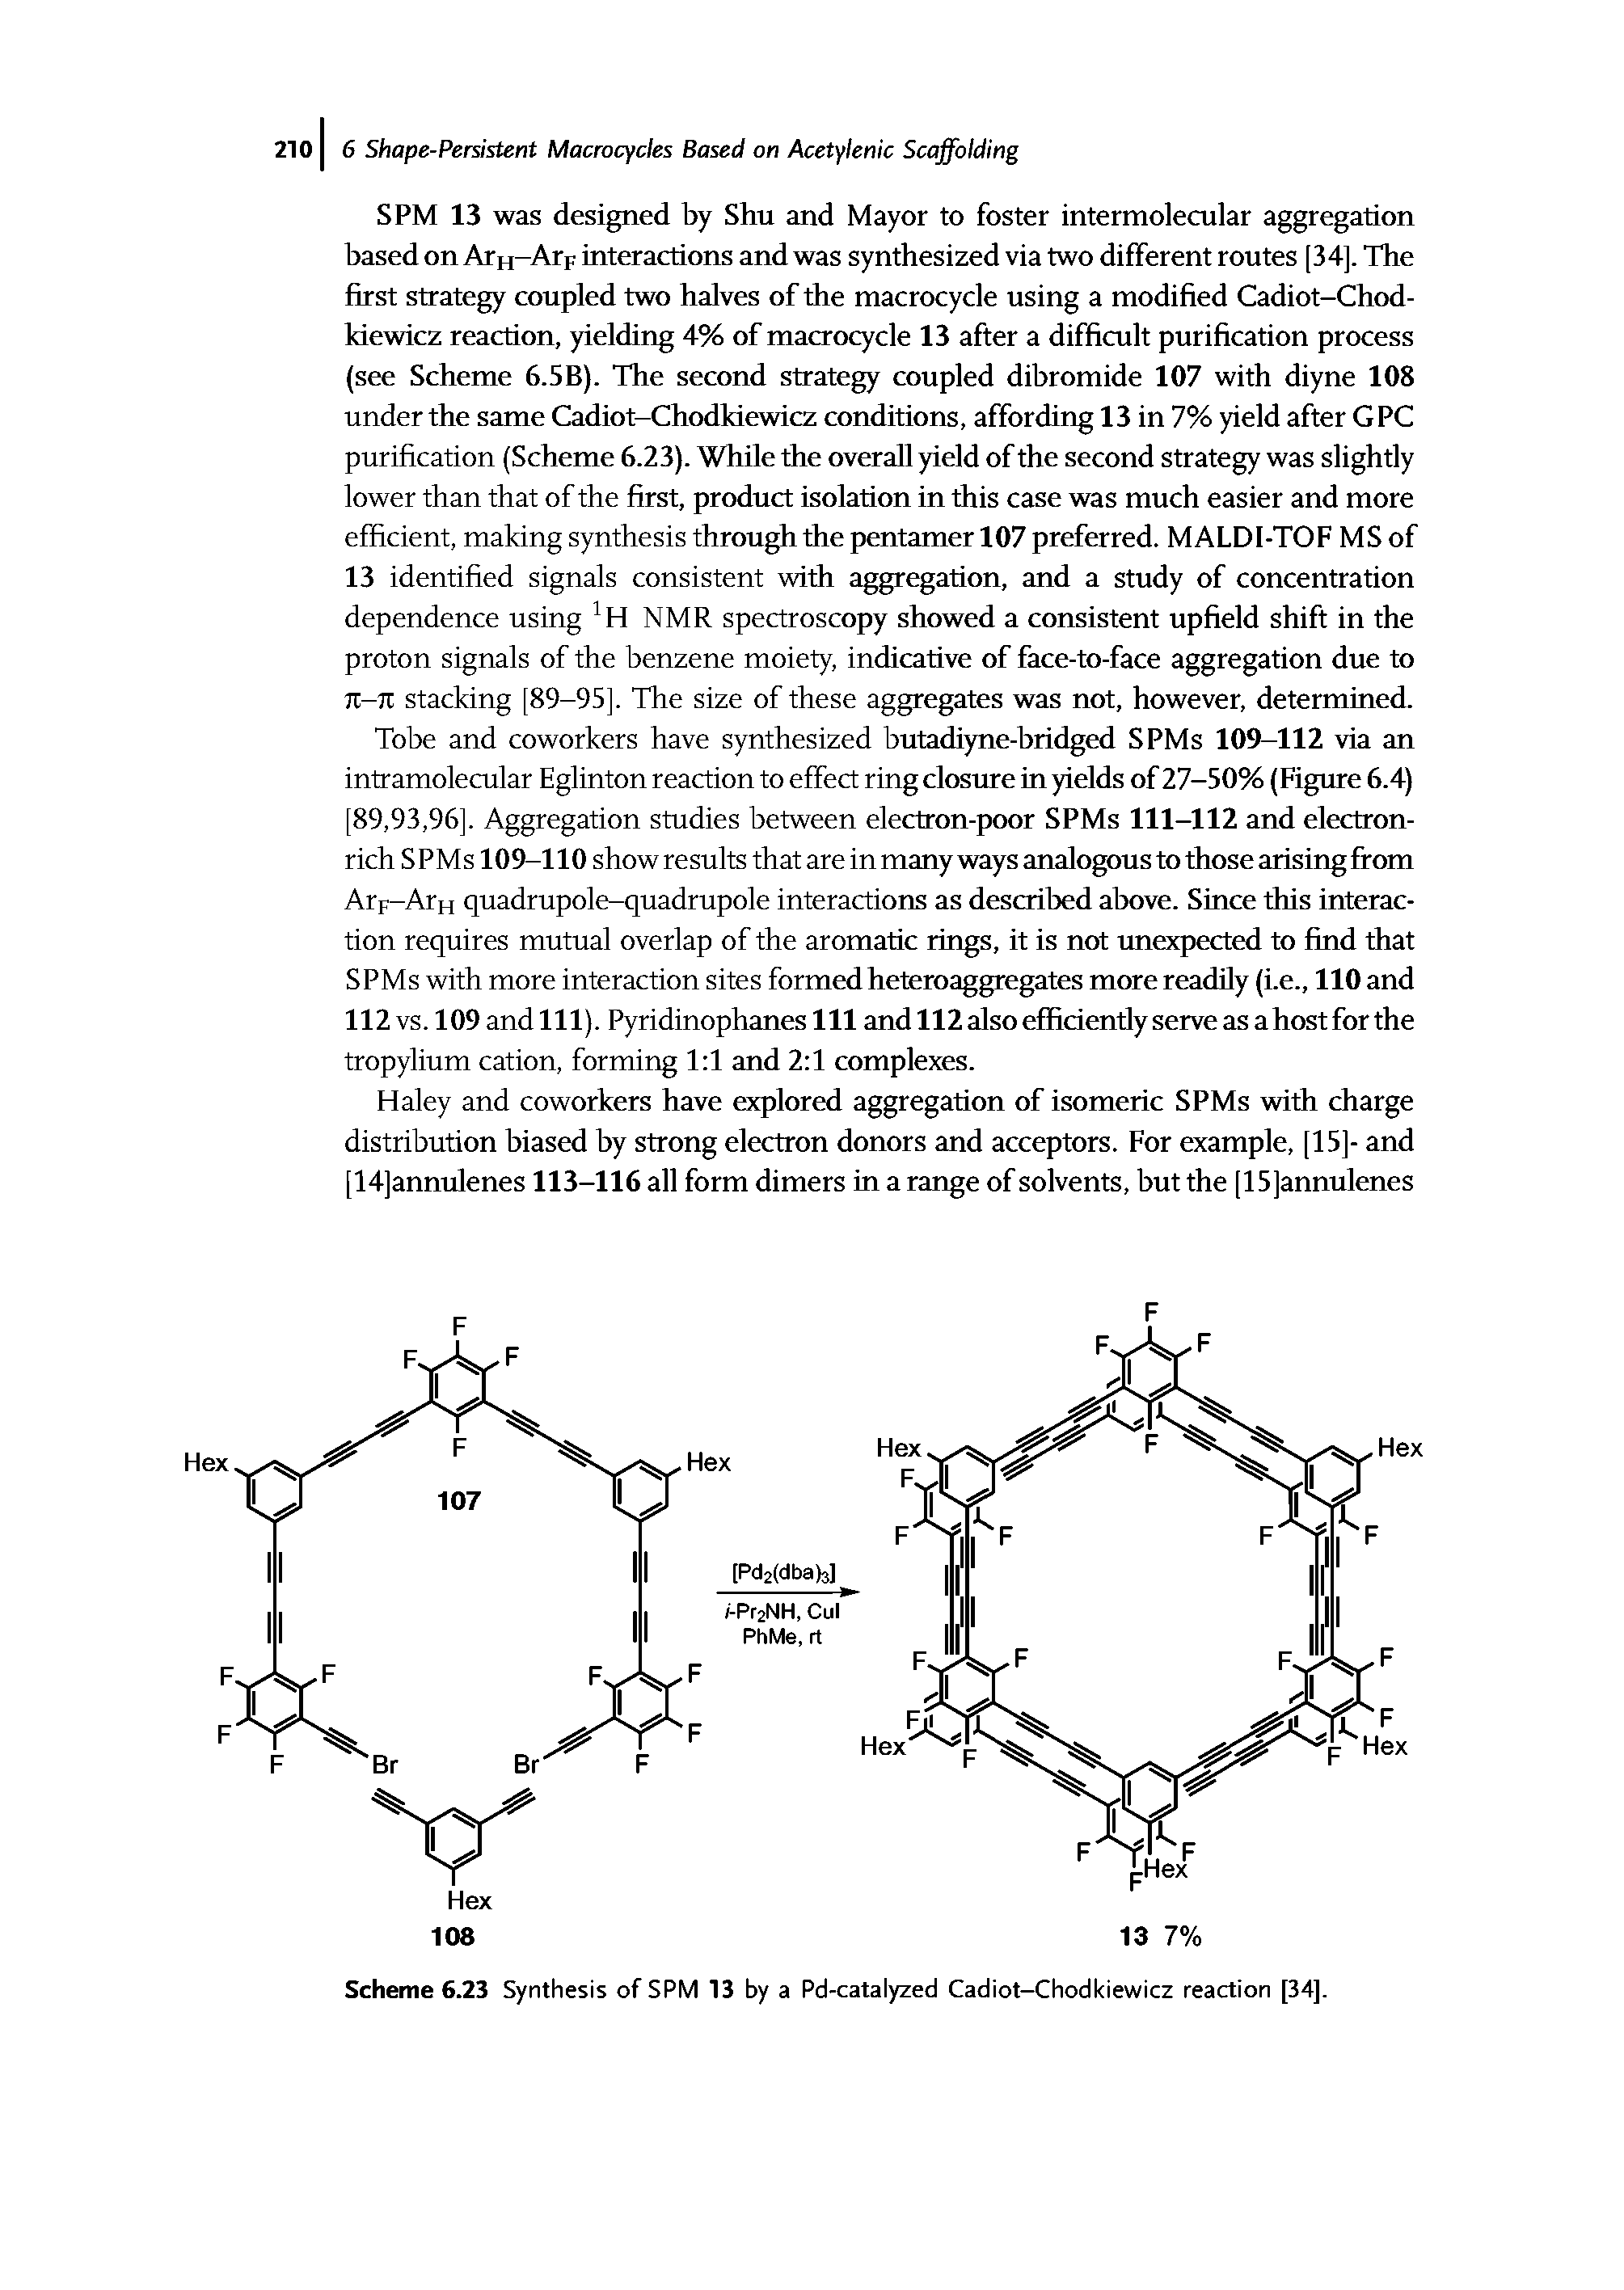 Scheme 6.23 Synthesis of SPM 13 by a Pd-catalyzed Cadiot-Chodkiewicz reaction [34],...